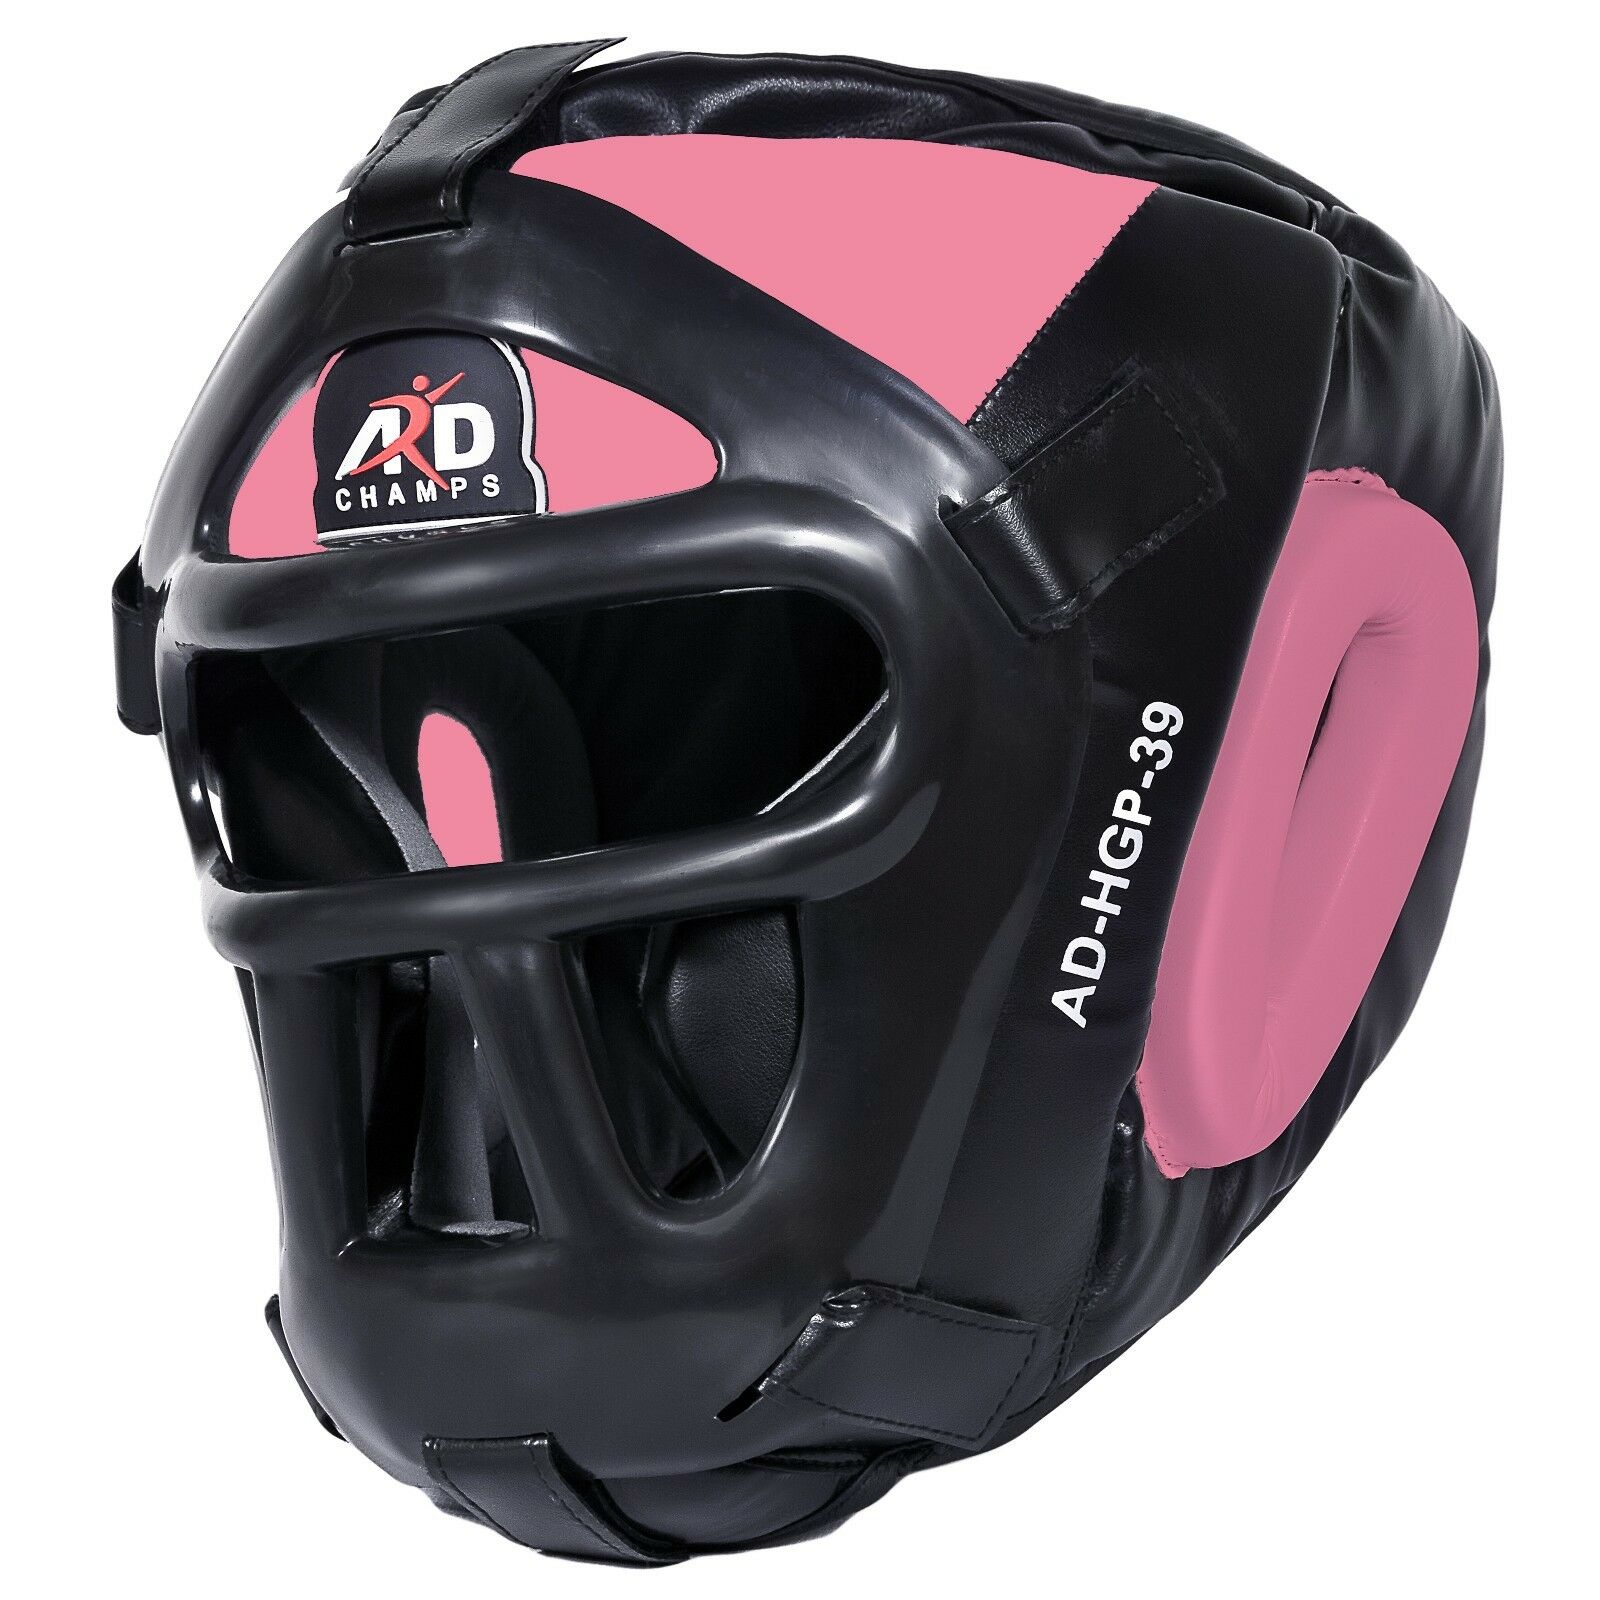 Ard Champs™ Protector Guard Wrestling Helmet Head Gear Boxing Mma Rugby- Pink